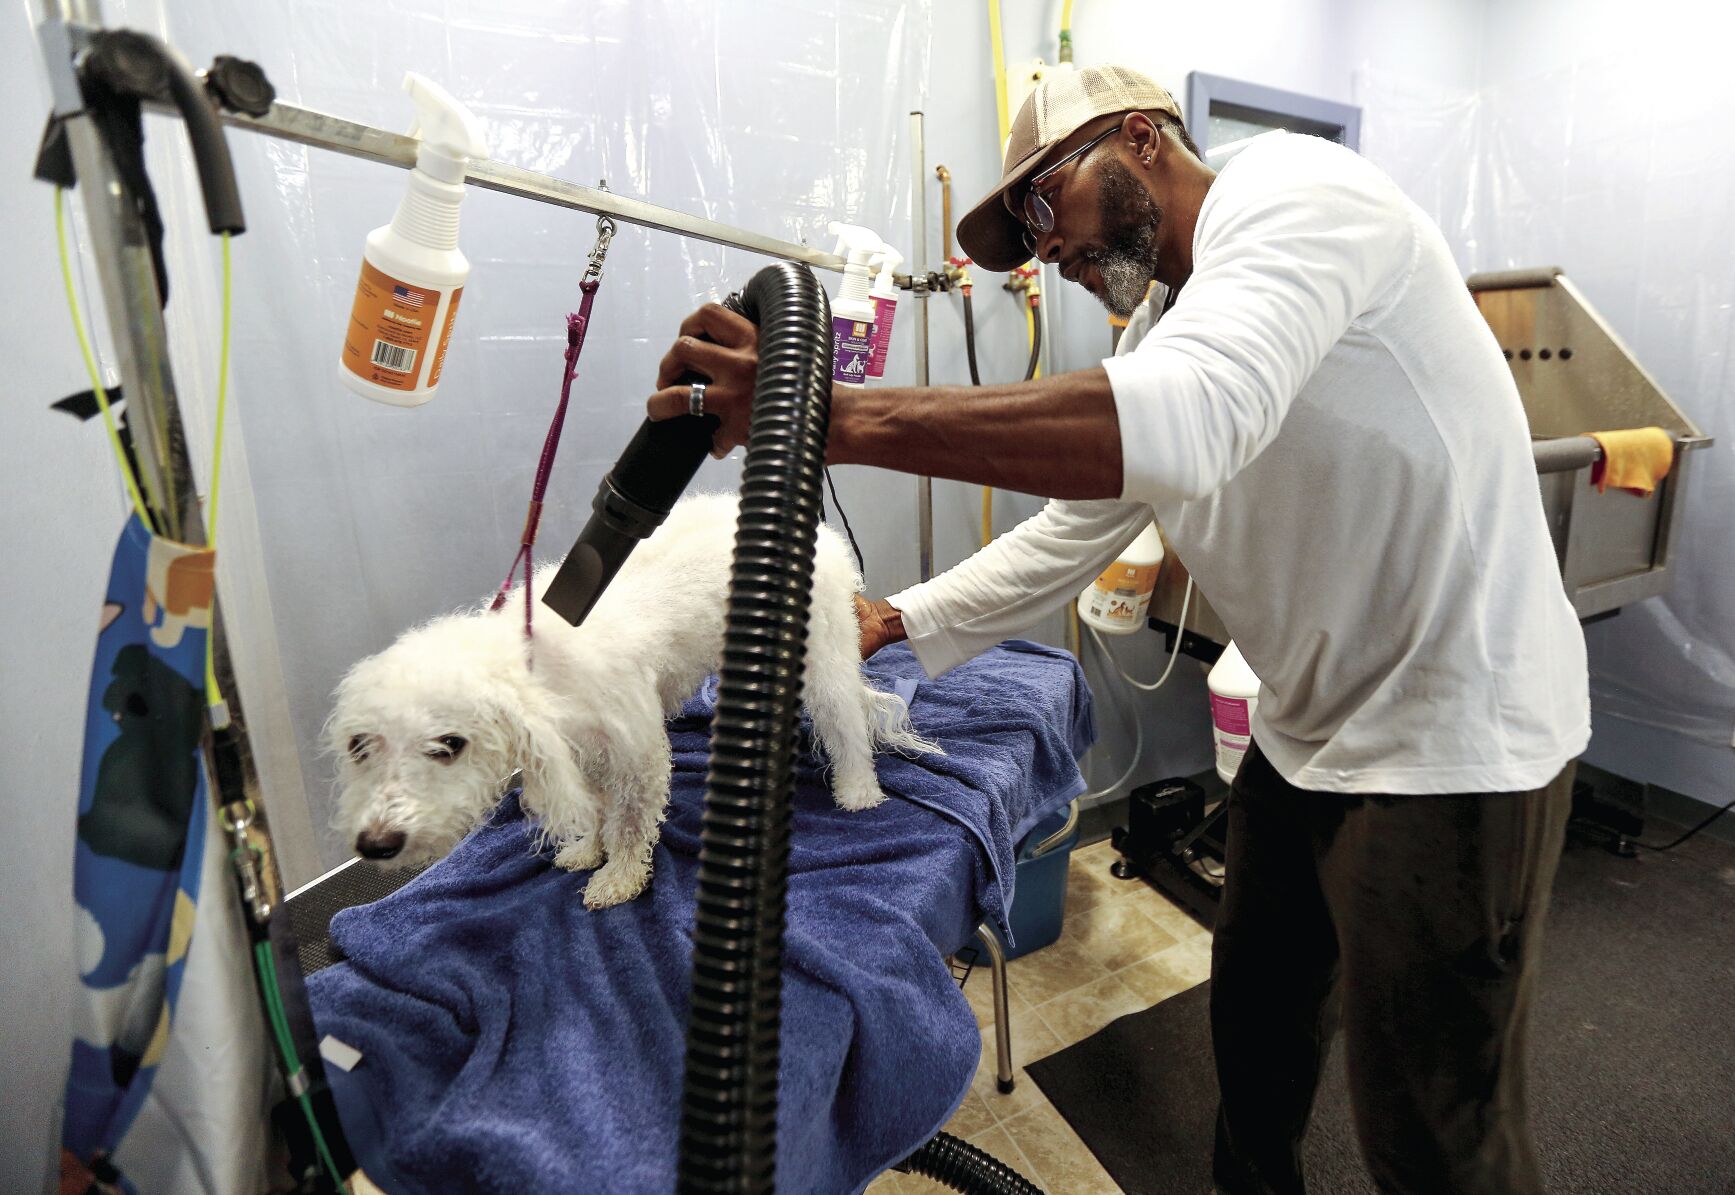 Co-owner Omar Finley dries off a dog at F.U.R. On 14th. The business is located at 490 E. 14th St. in Dubuque.    PHOTO CREDIT: Dave Kettering